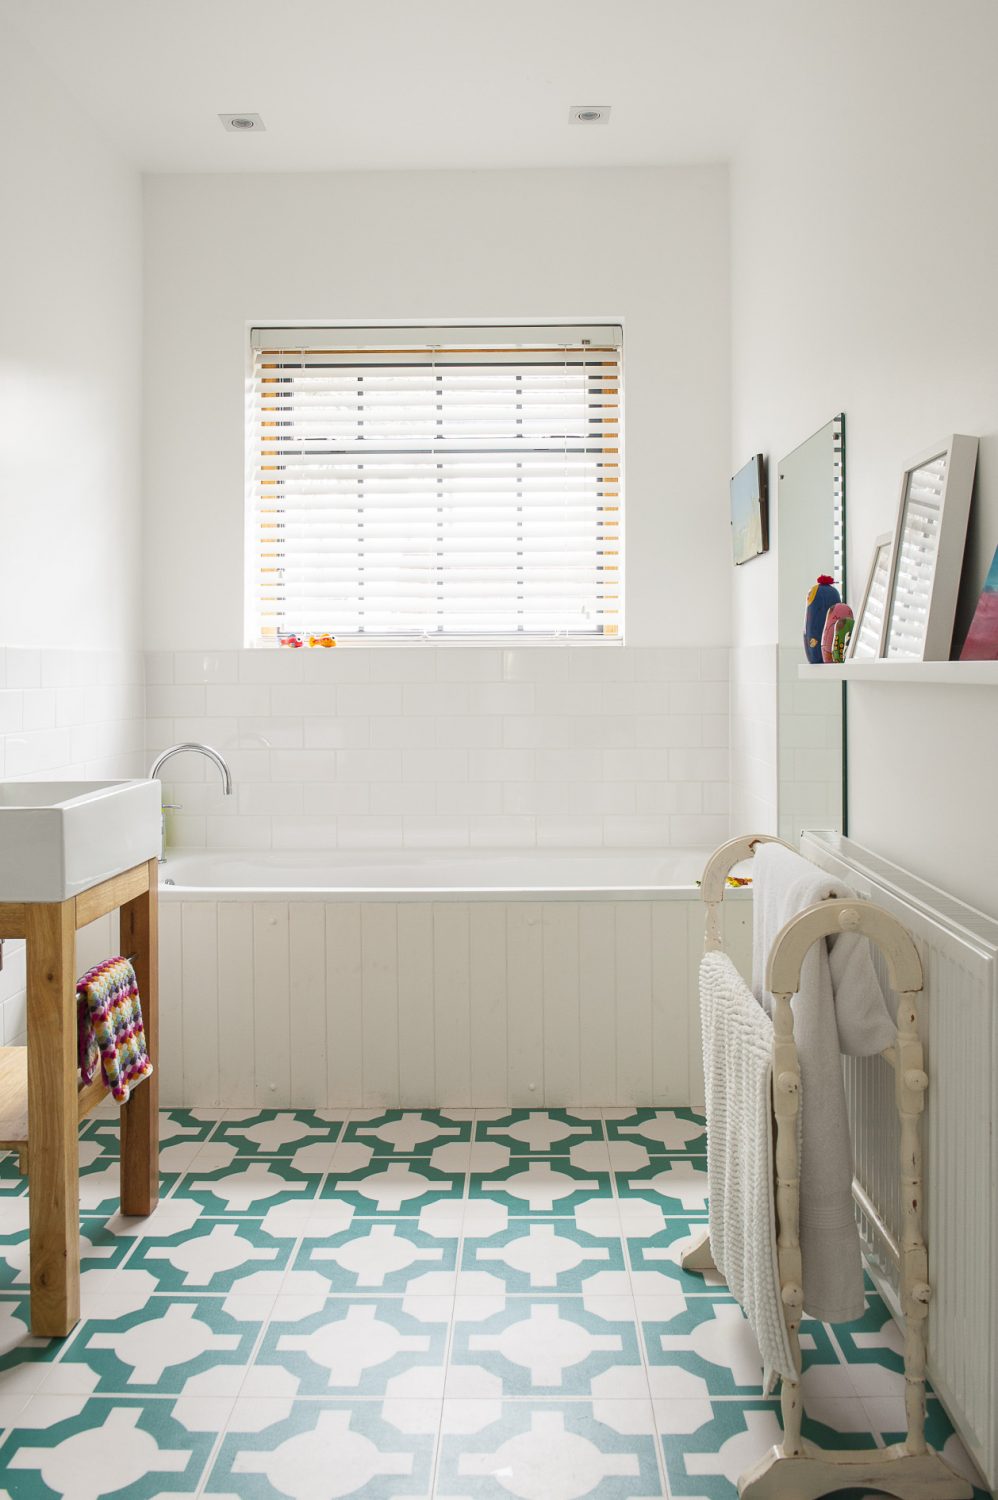 The simple bathroom manages to be both stylish and functional